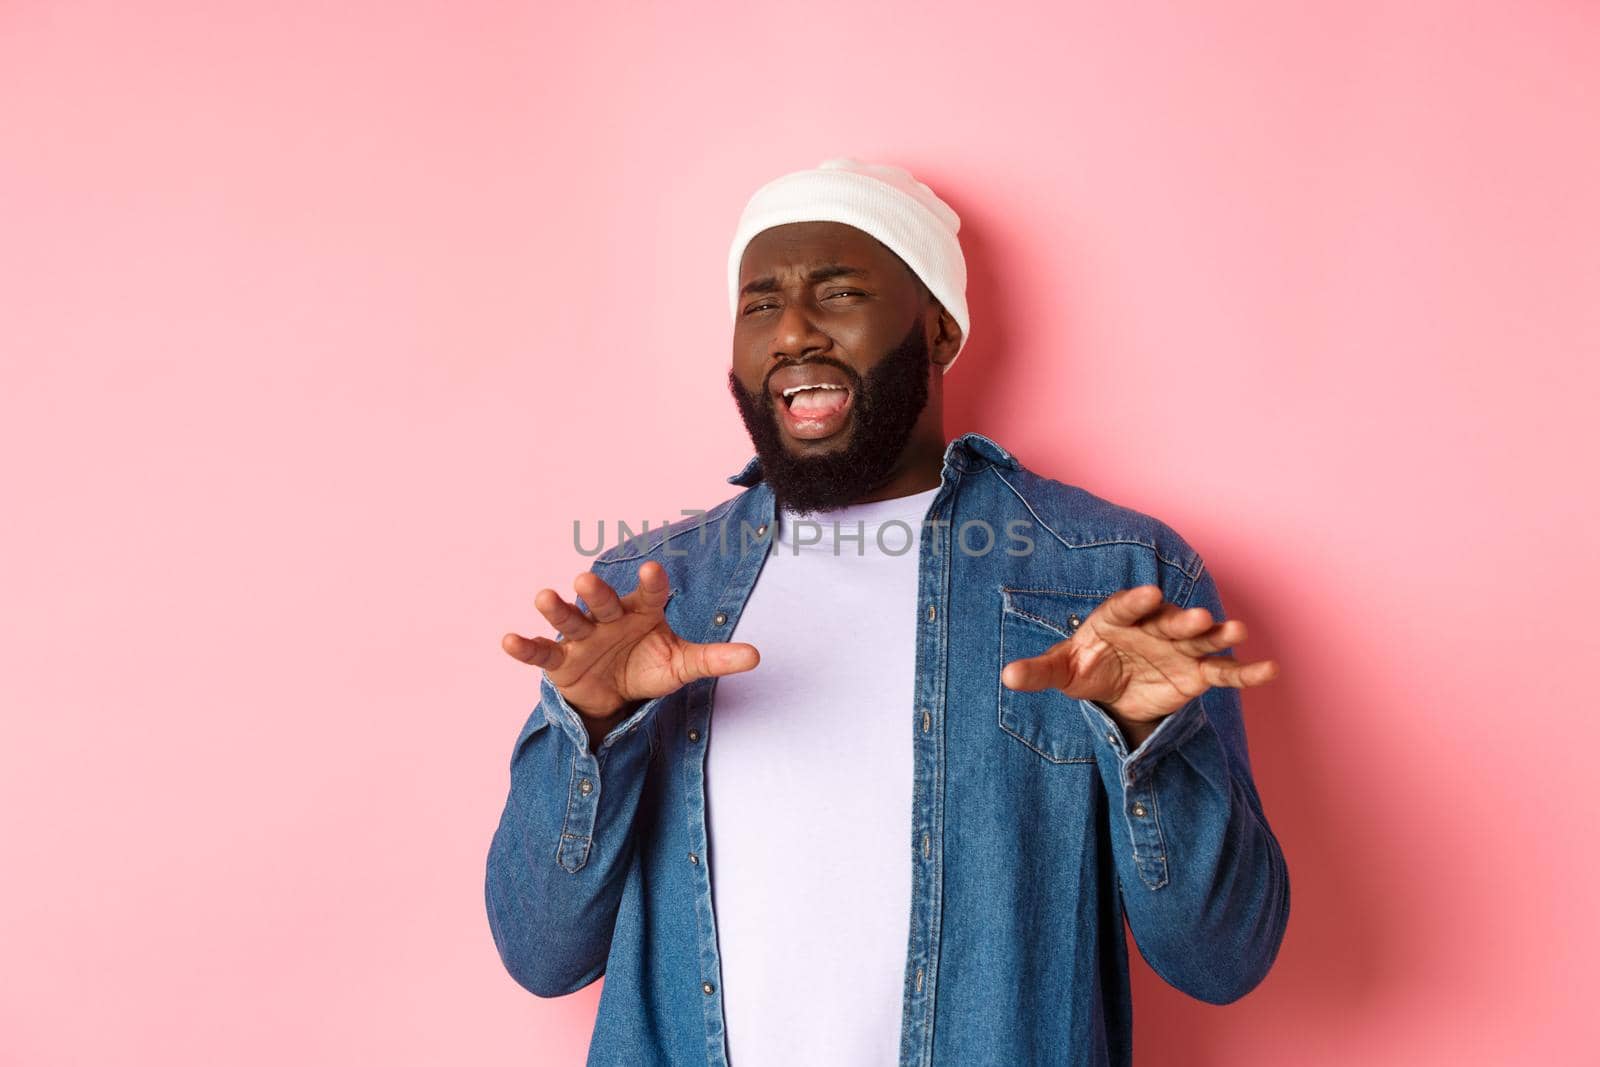 Image of disgusted picky Black man cringe from something disturbing, refusing bad offer, grimacing with dislike and aversion, standing over pink background.